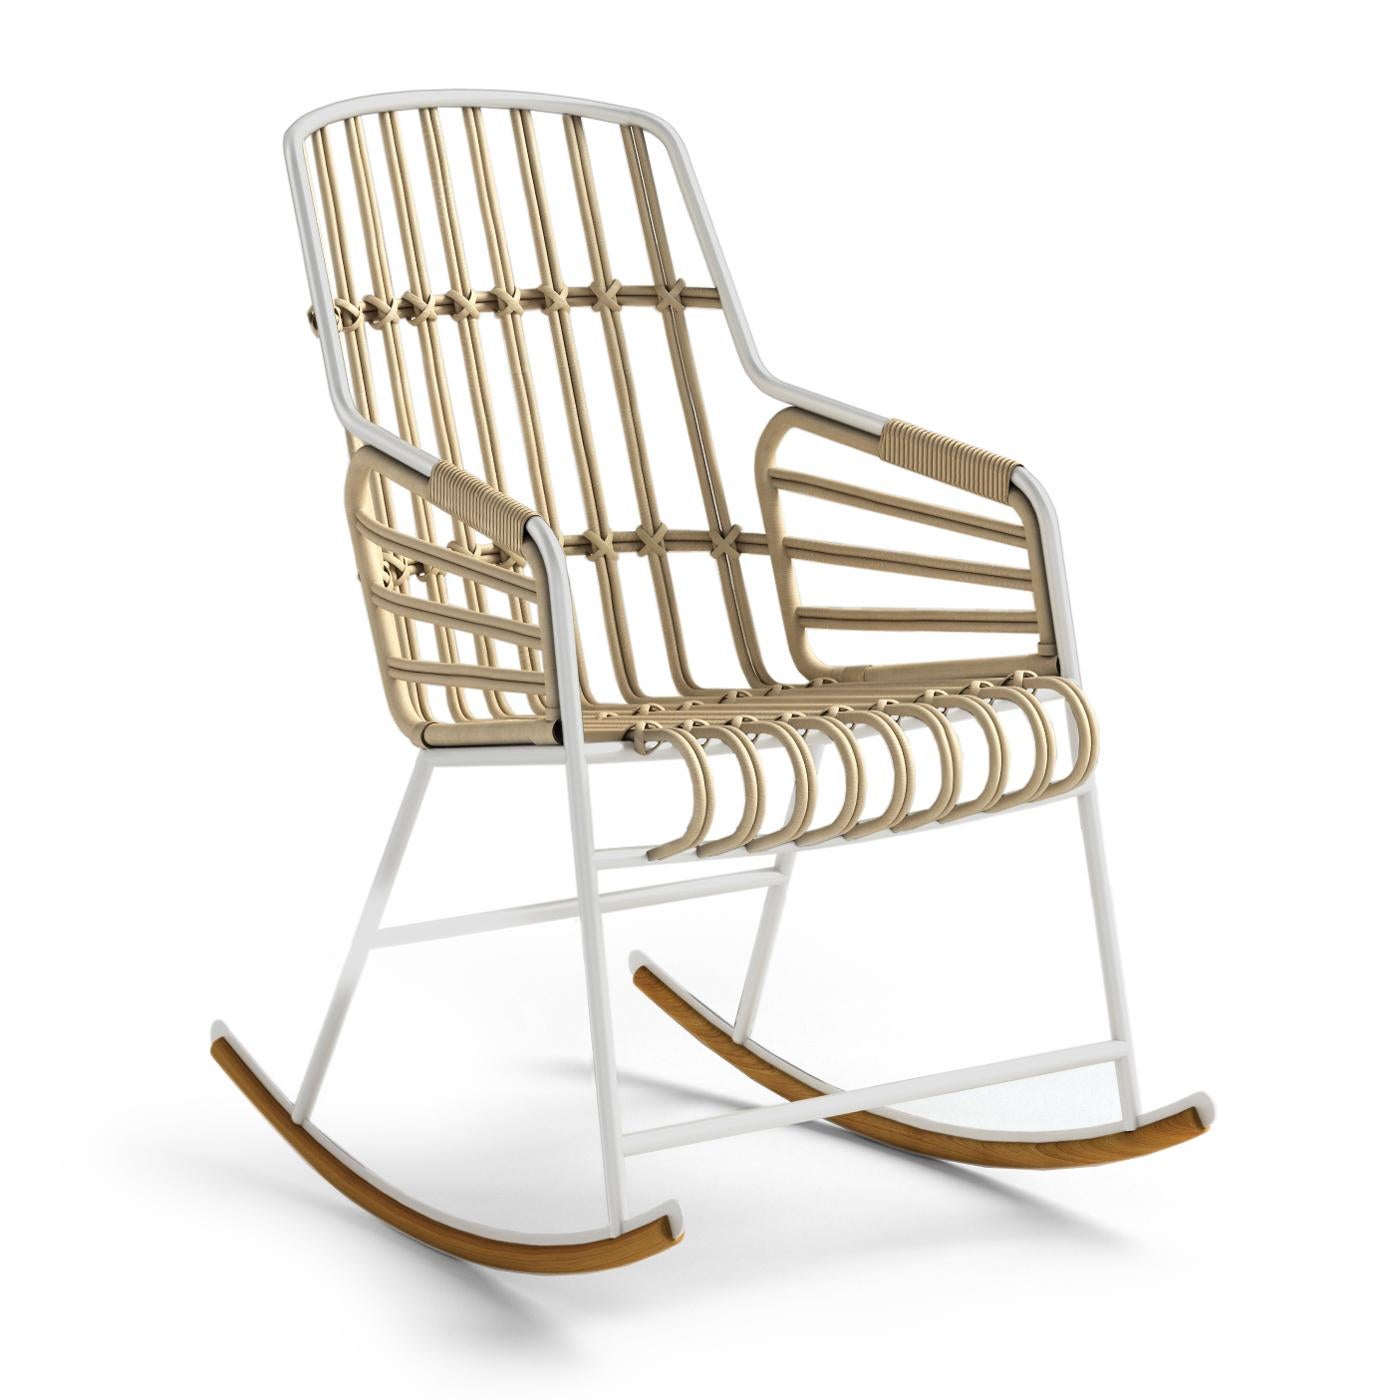 This rocking chair is part of the Raphia collection of chairs originally designed by LucidiPevere in 2013 characterized by a combination of artisan Craft and Industrial Production, natural materials, and metal. A superbly contemporary and elegant